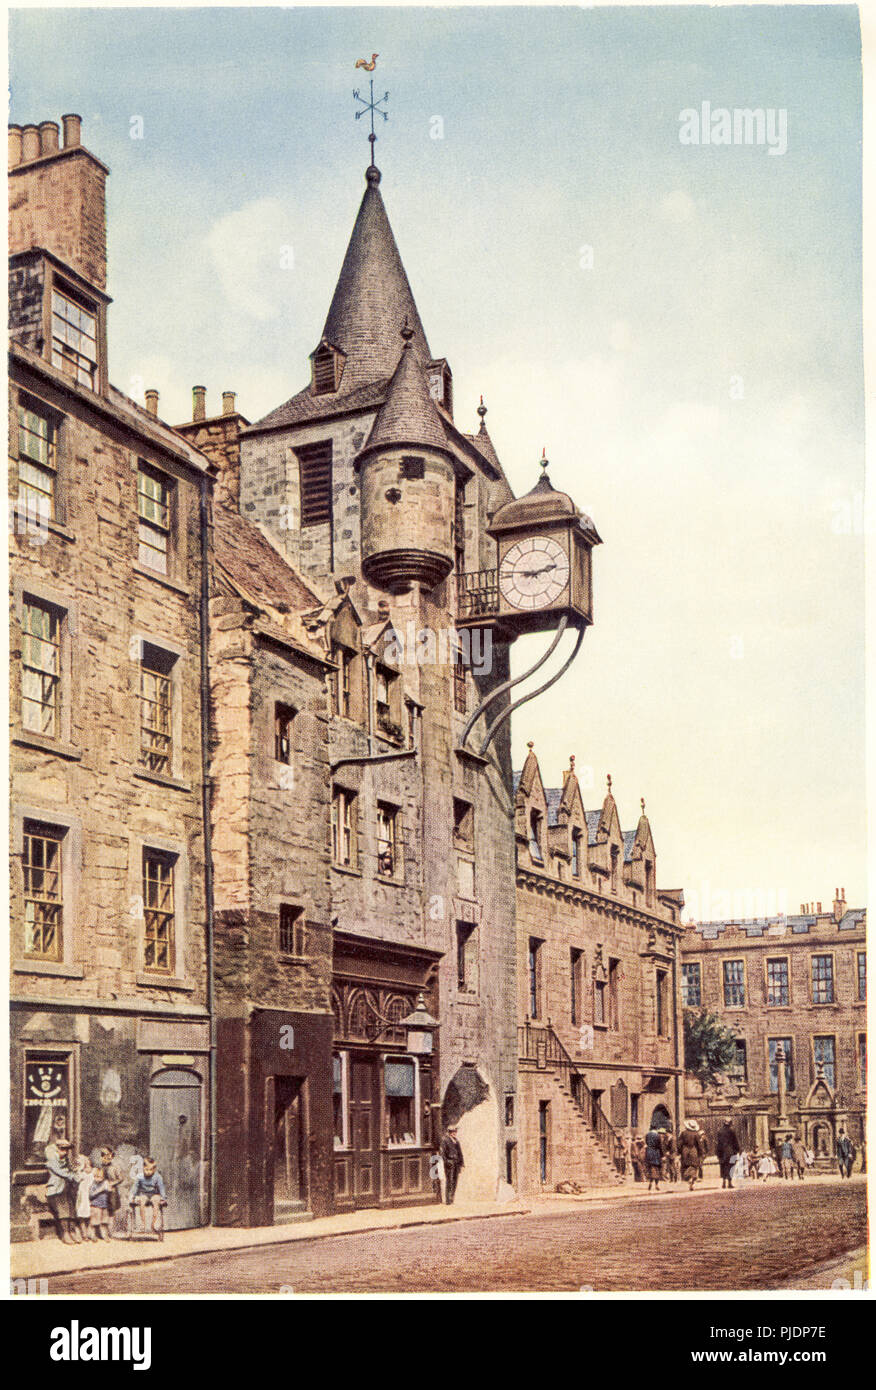 A coloured illustration of The Tolbooth, Canongate, Edinburgh UK scanned at high resolution from a book printed in 1929. Believed copyright free. Stock Photo